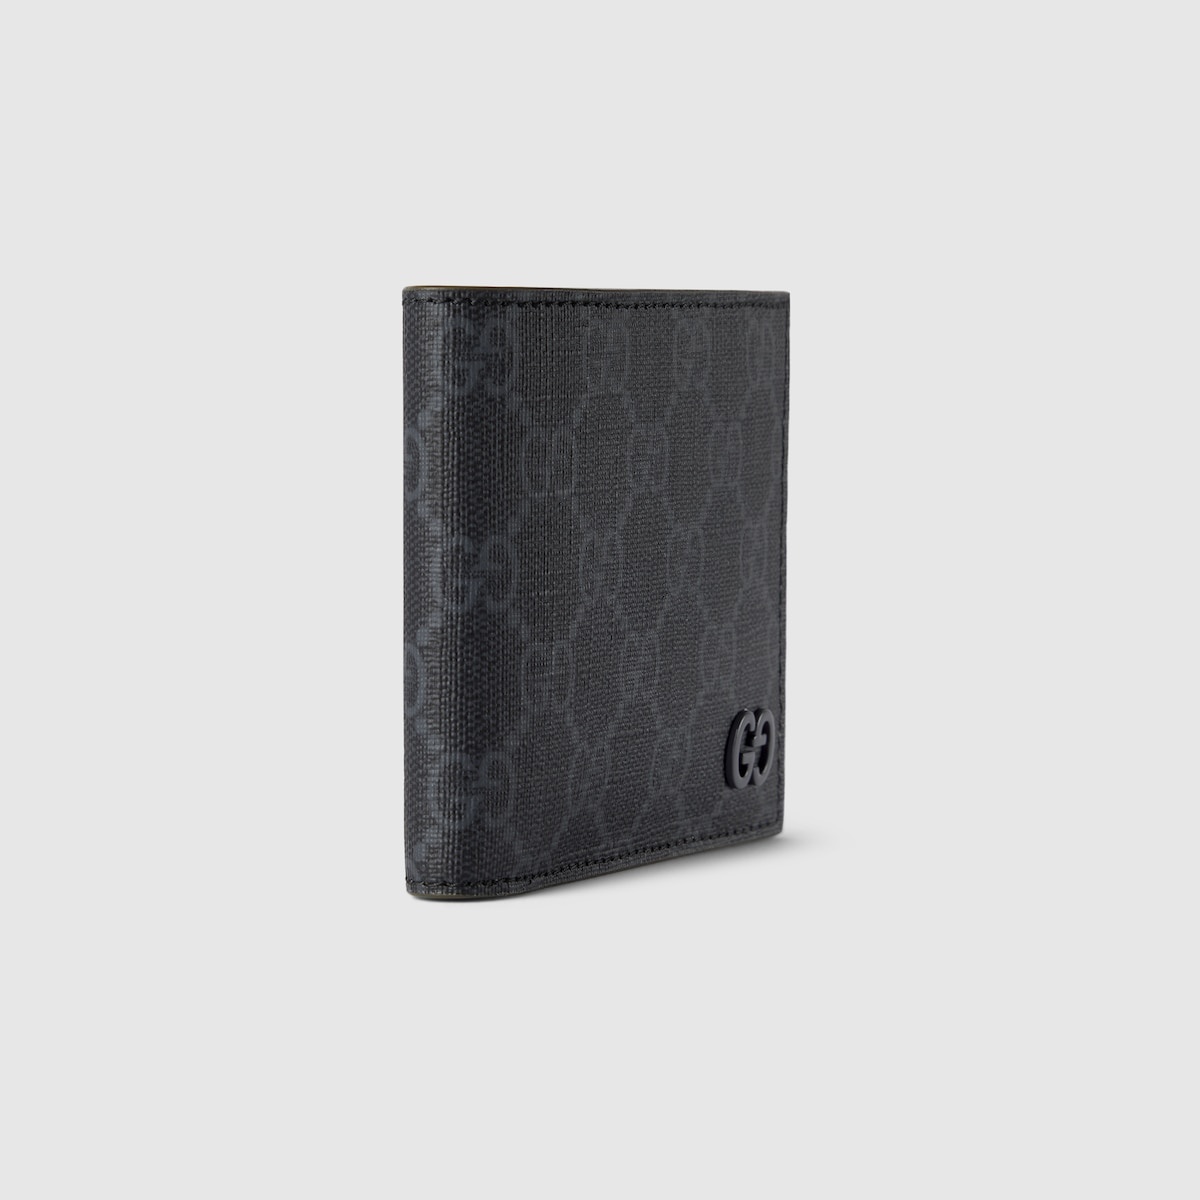 GG wallet with GG detail - 3